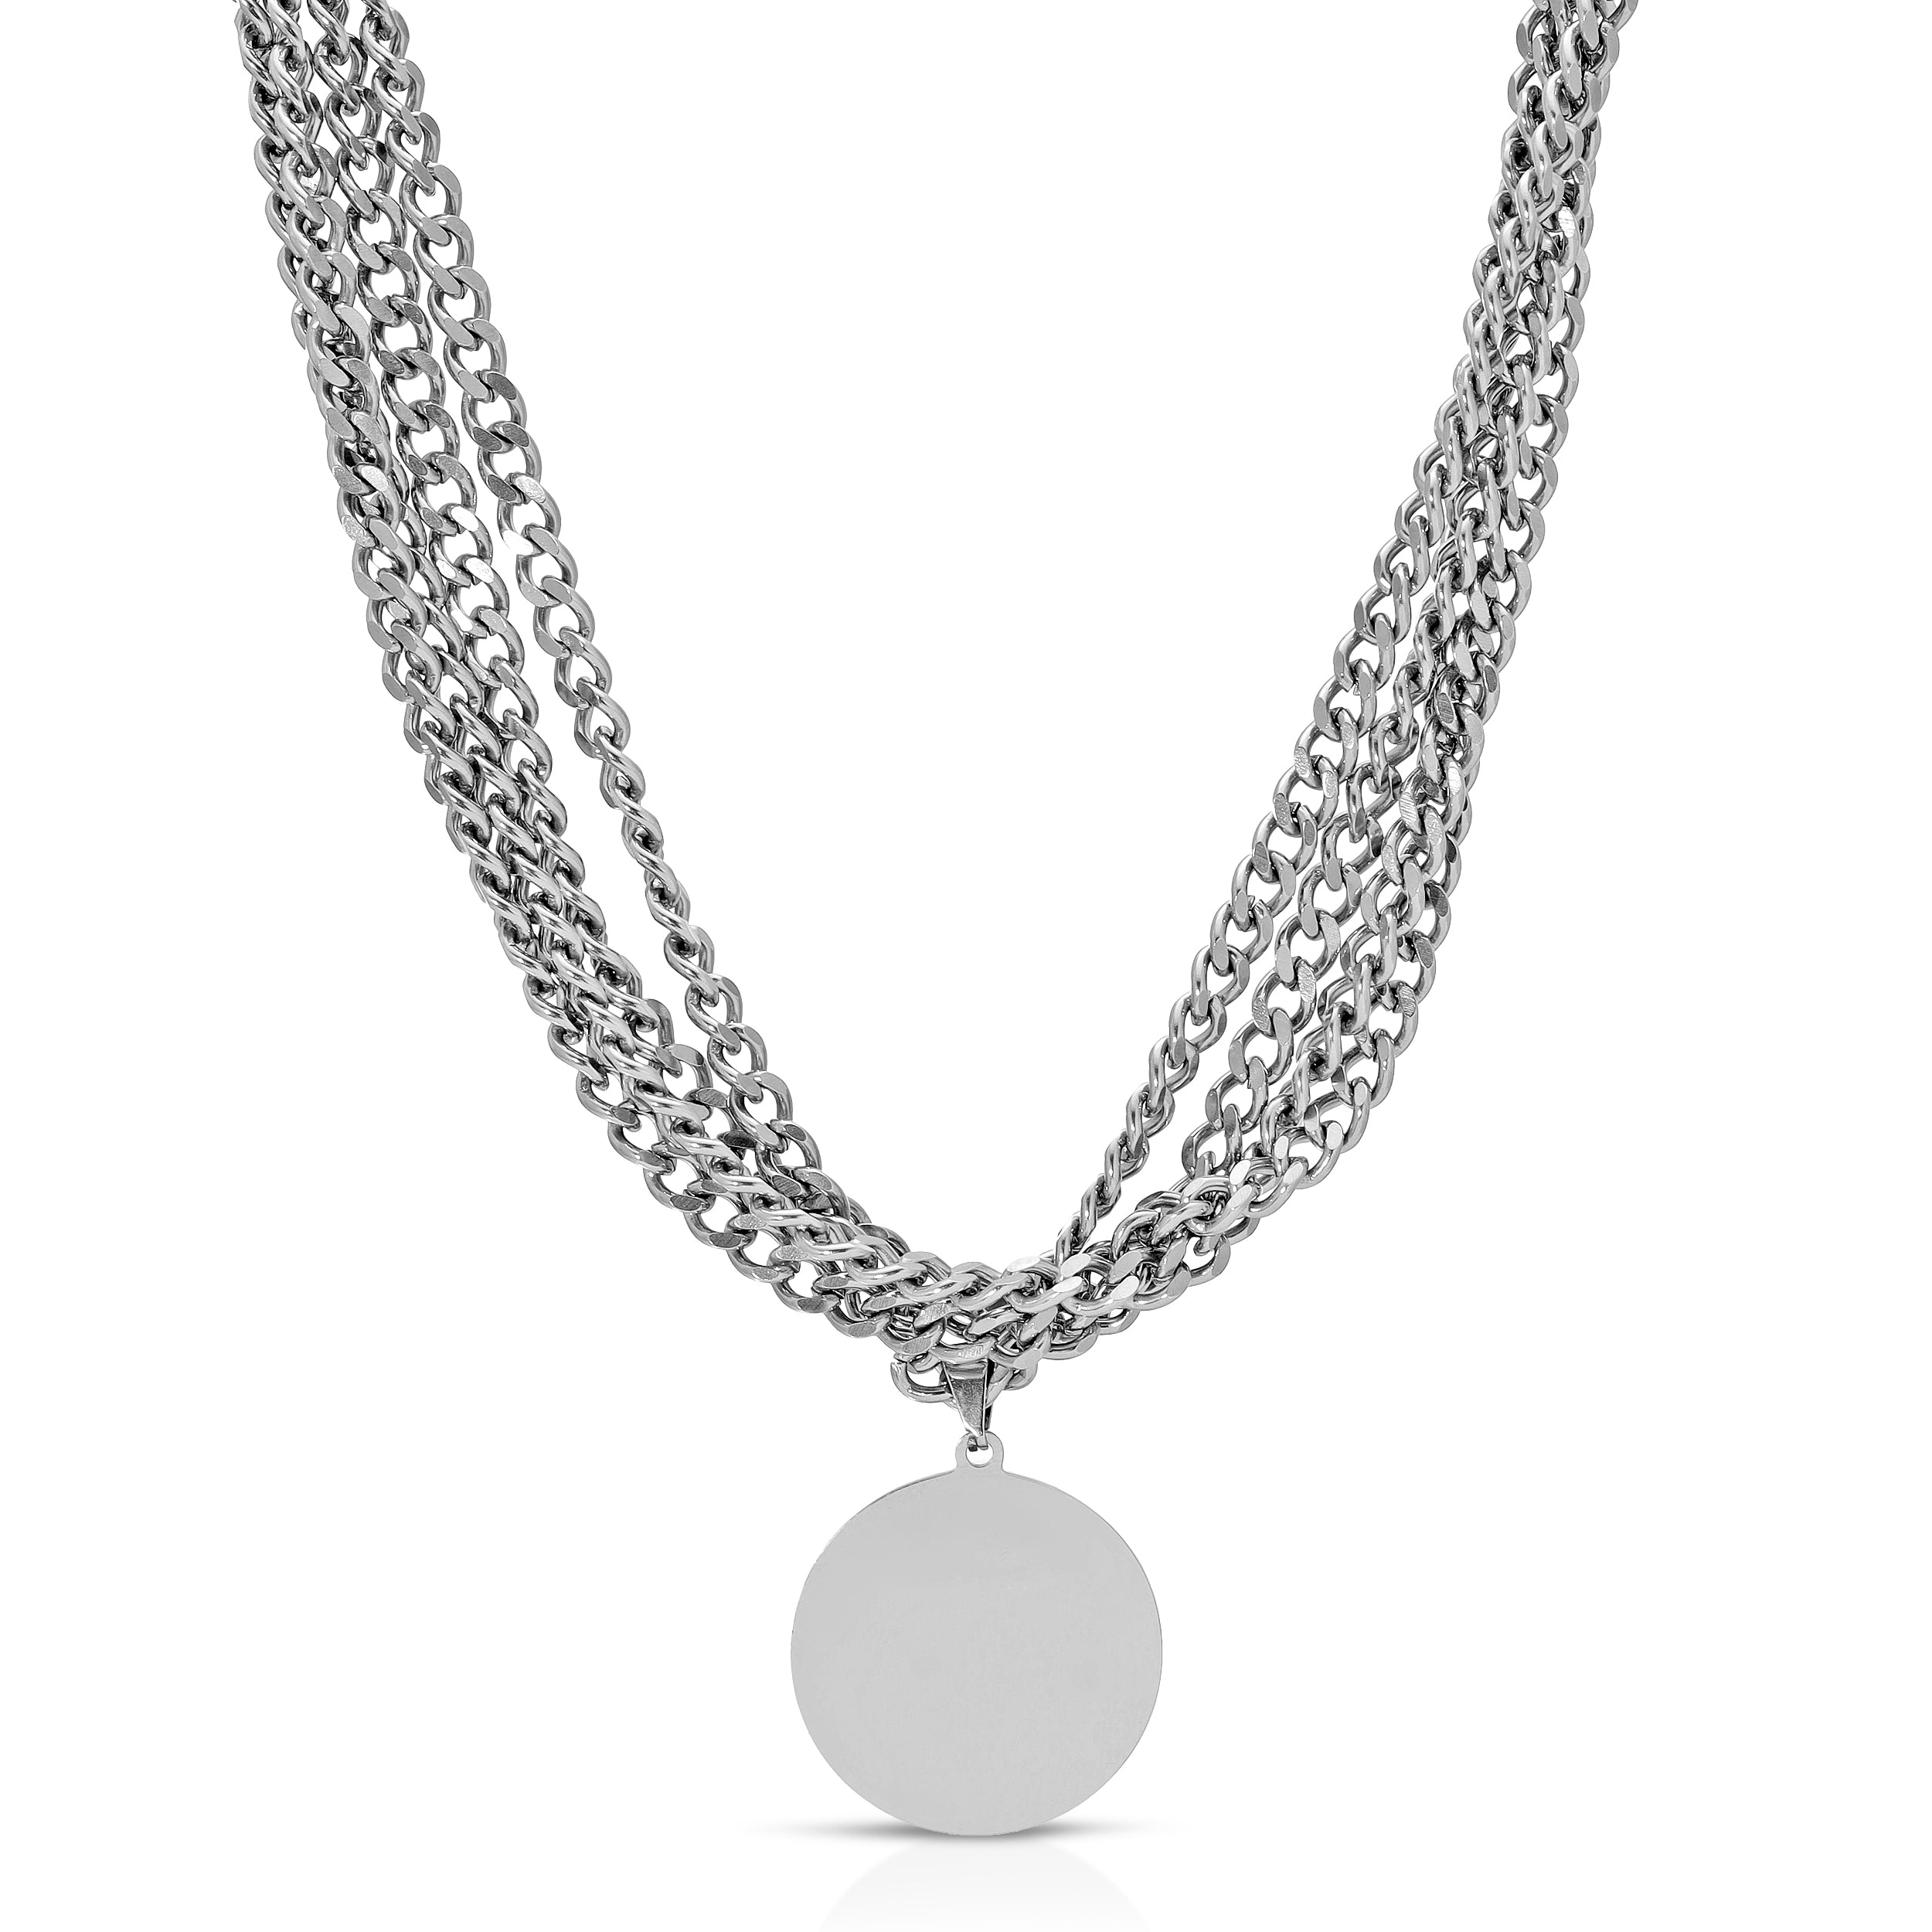 Chain Reaction Timeless Stacked Necklace | Chain Necklace Women | Chain Reaction Necklace - JaJaara